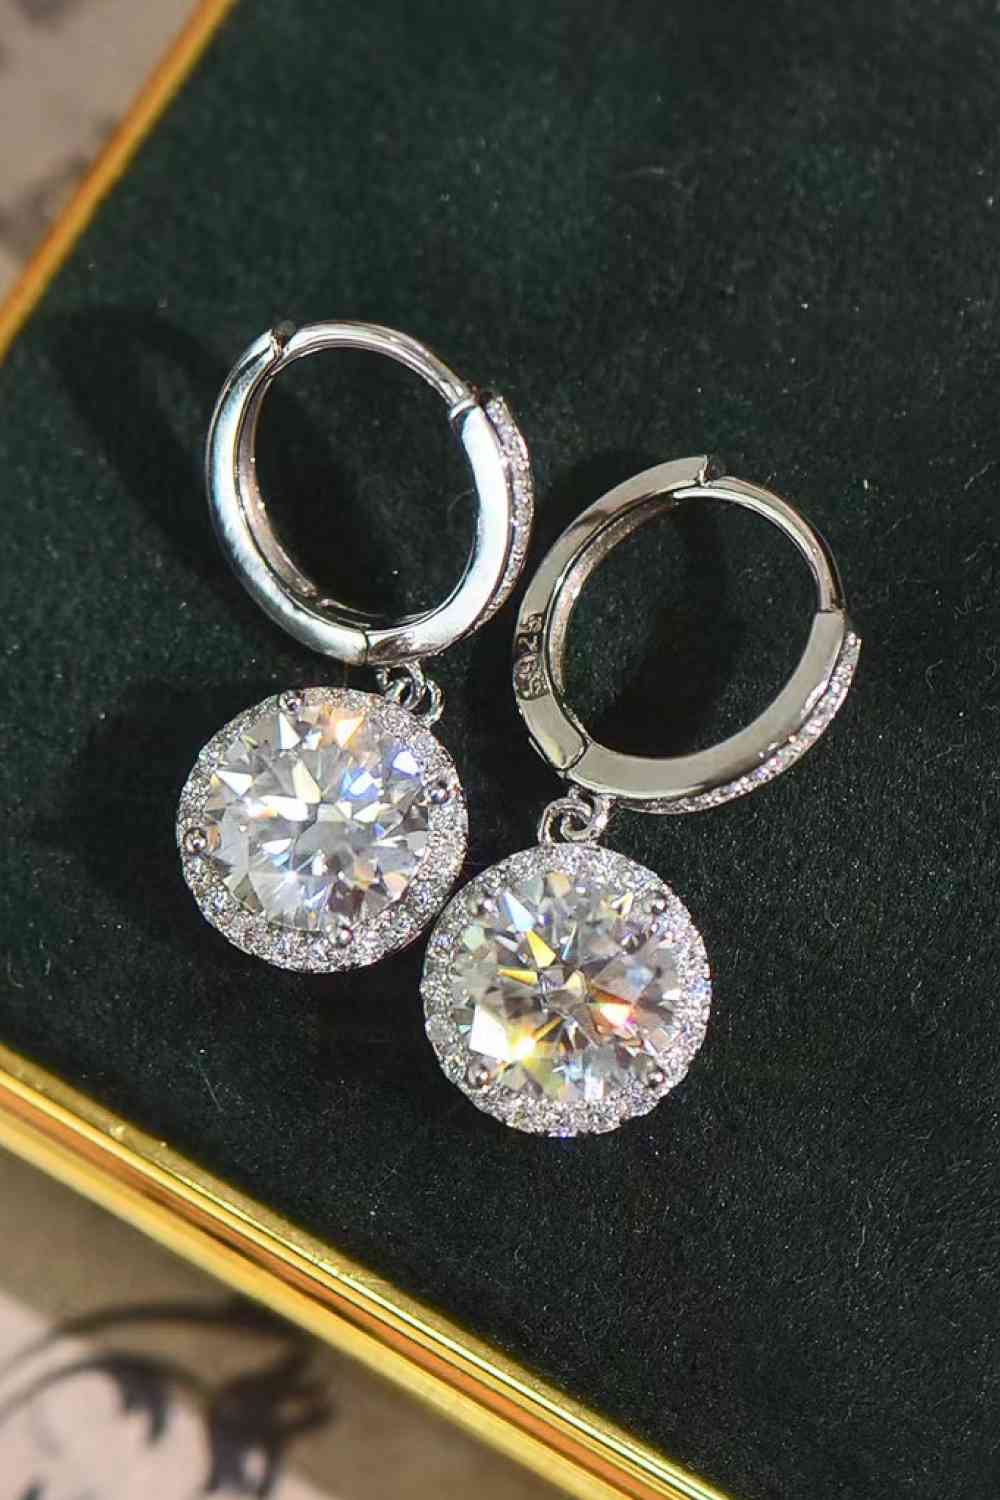 Clear moissanite stone earrings set in platinum plated sterling silver